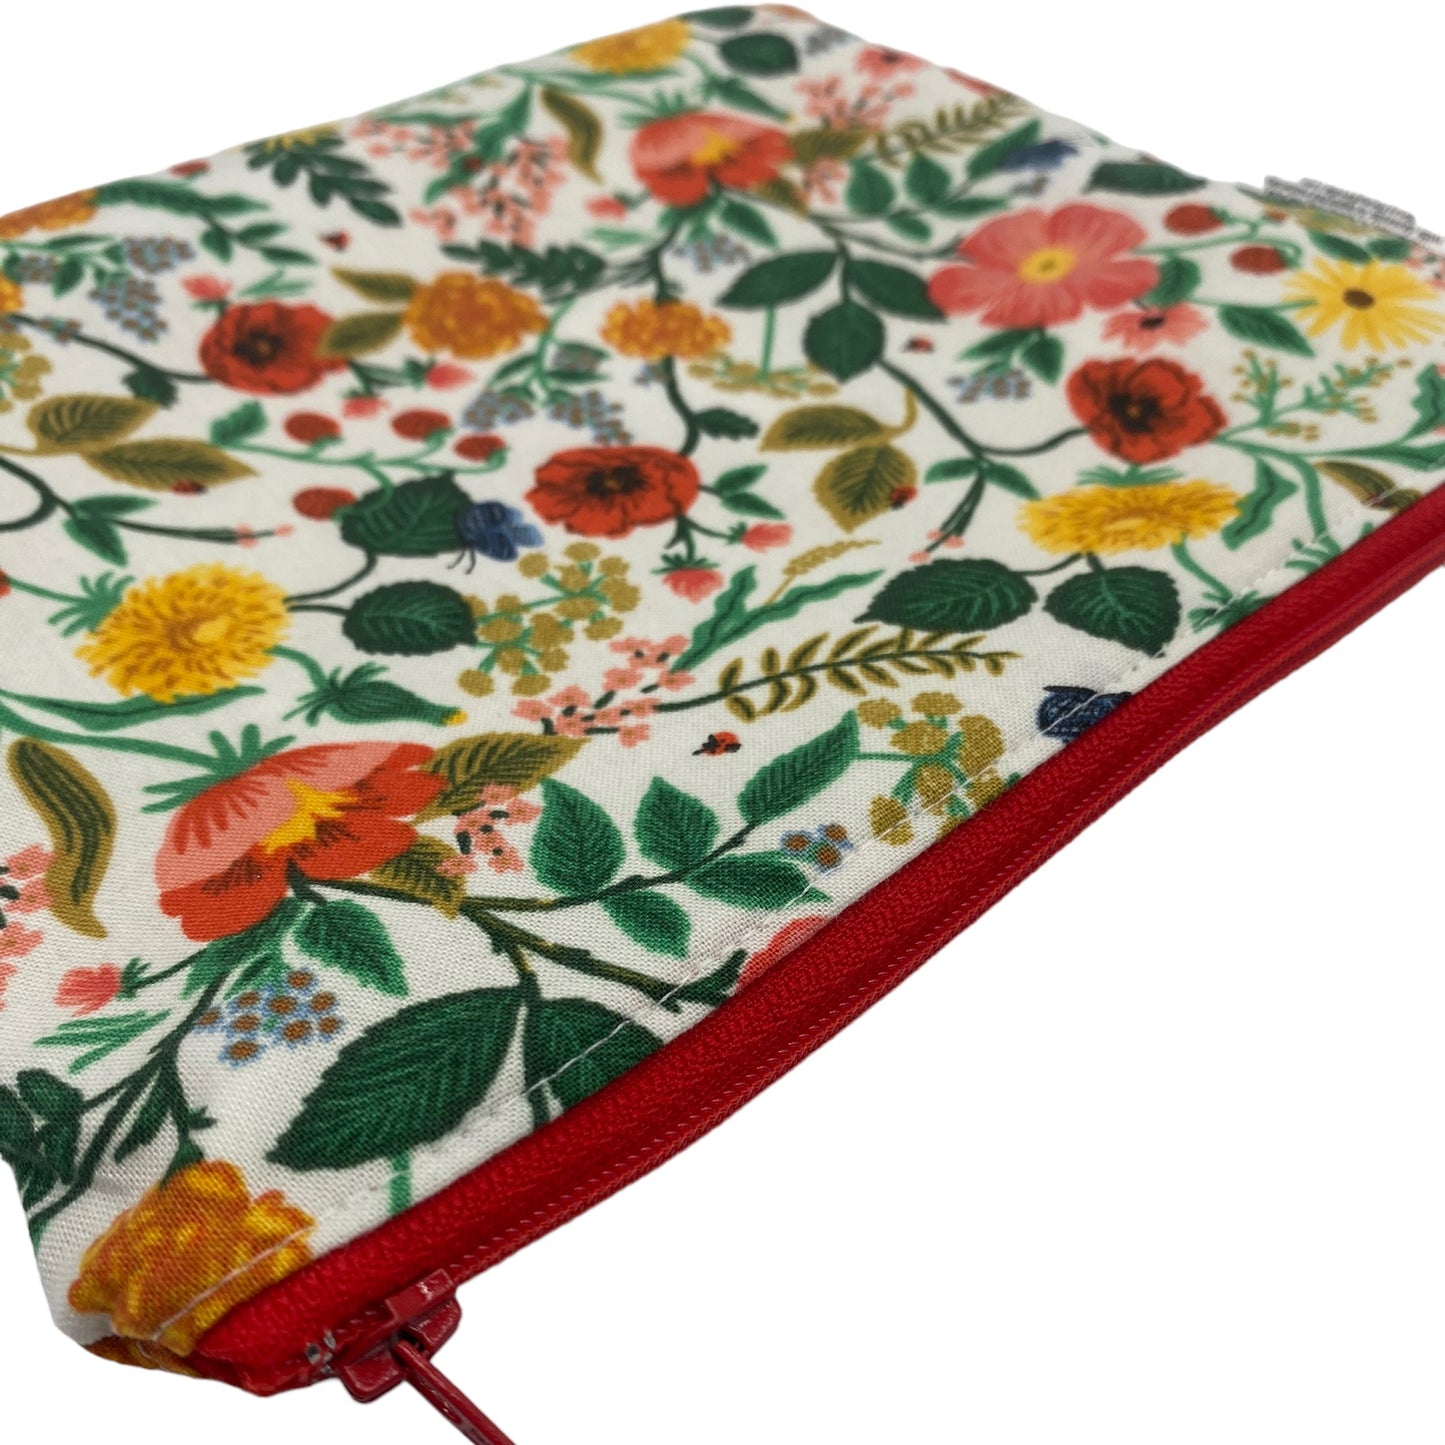 Sandwich Sized Reusable Zippered Bag Floral with Butterflies and Ladybugs